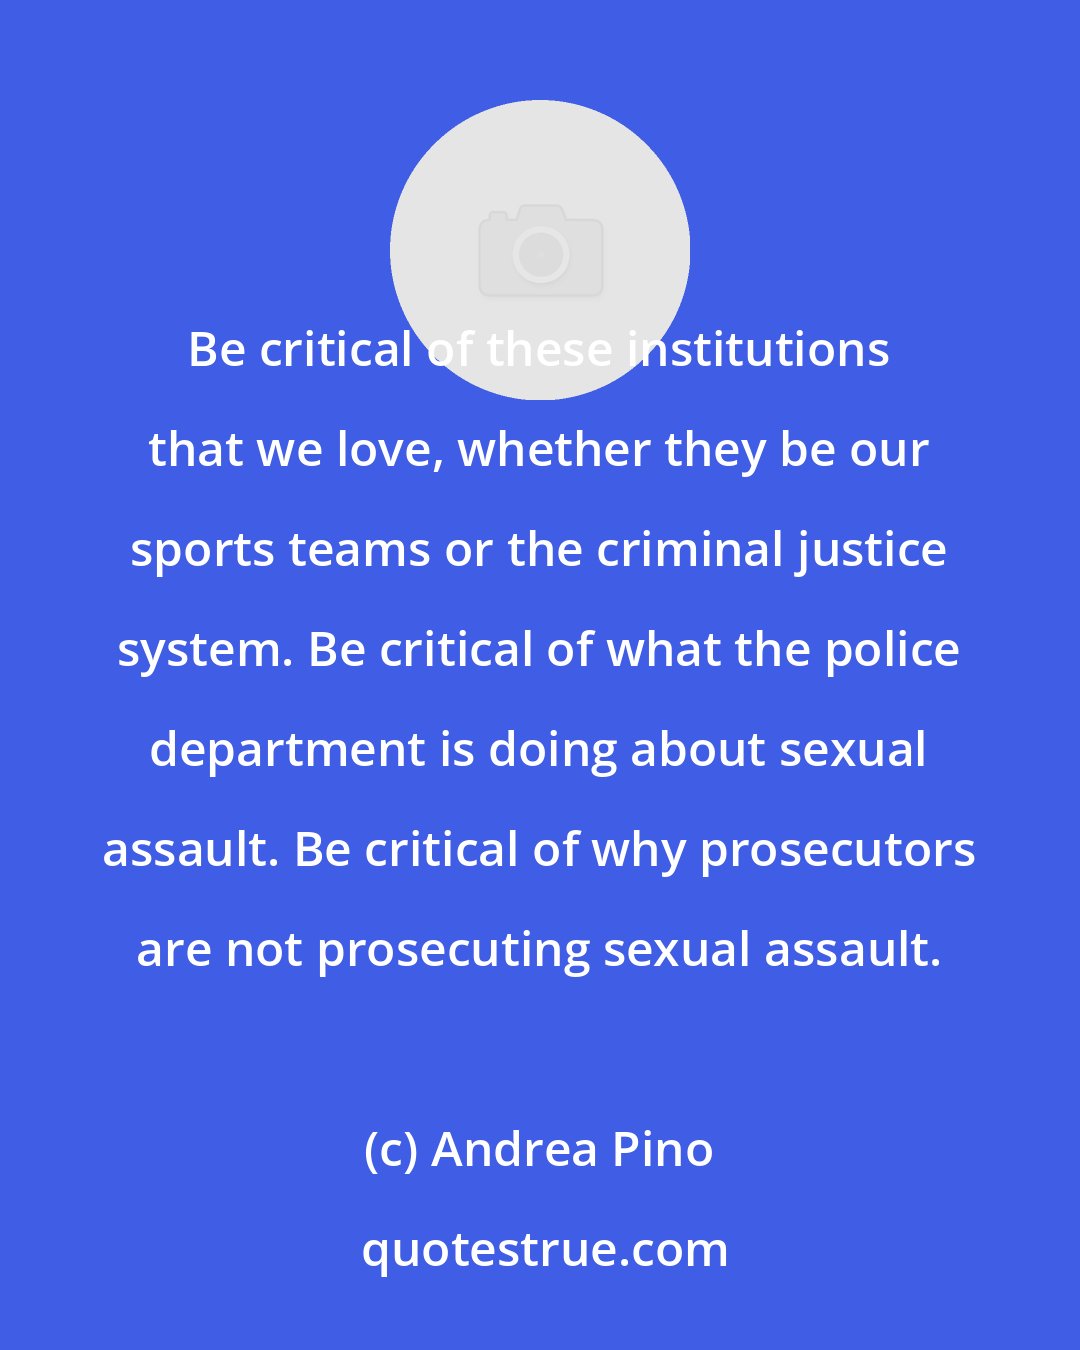 Andrea Pino: Be critical of these institutions that we love, whether they be our sports teams or the criminal justice system. Be critical of what the police department is doing about sexual assault. Be critical of why prosecutors are not prosecuting sexual assault.